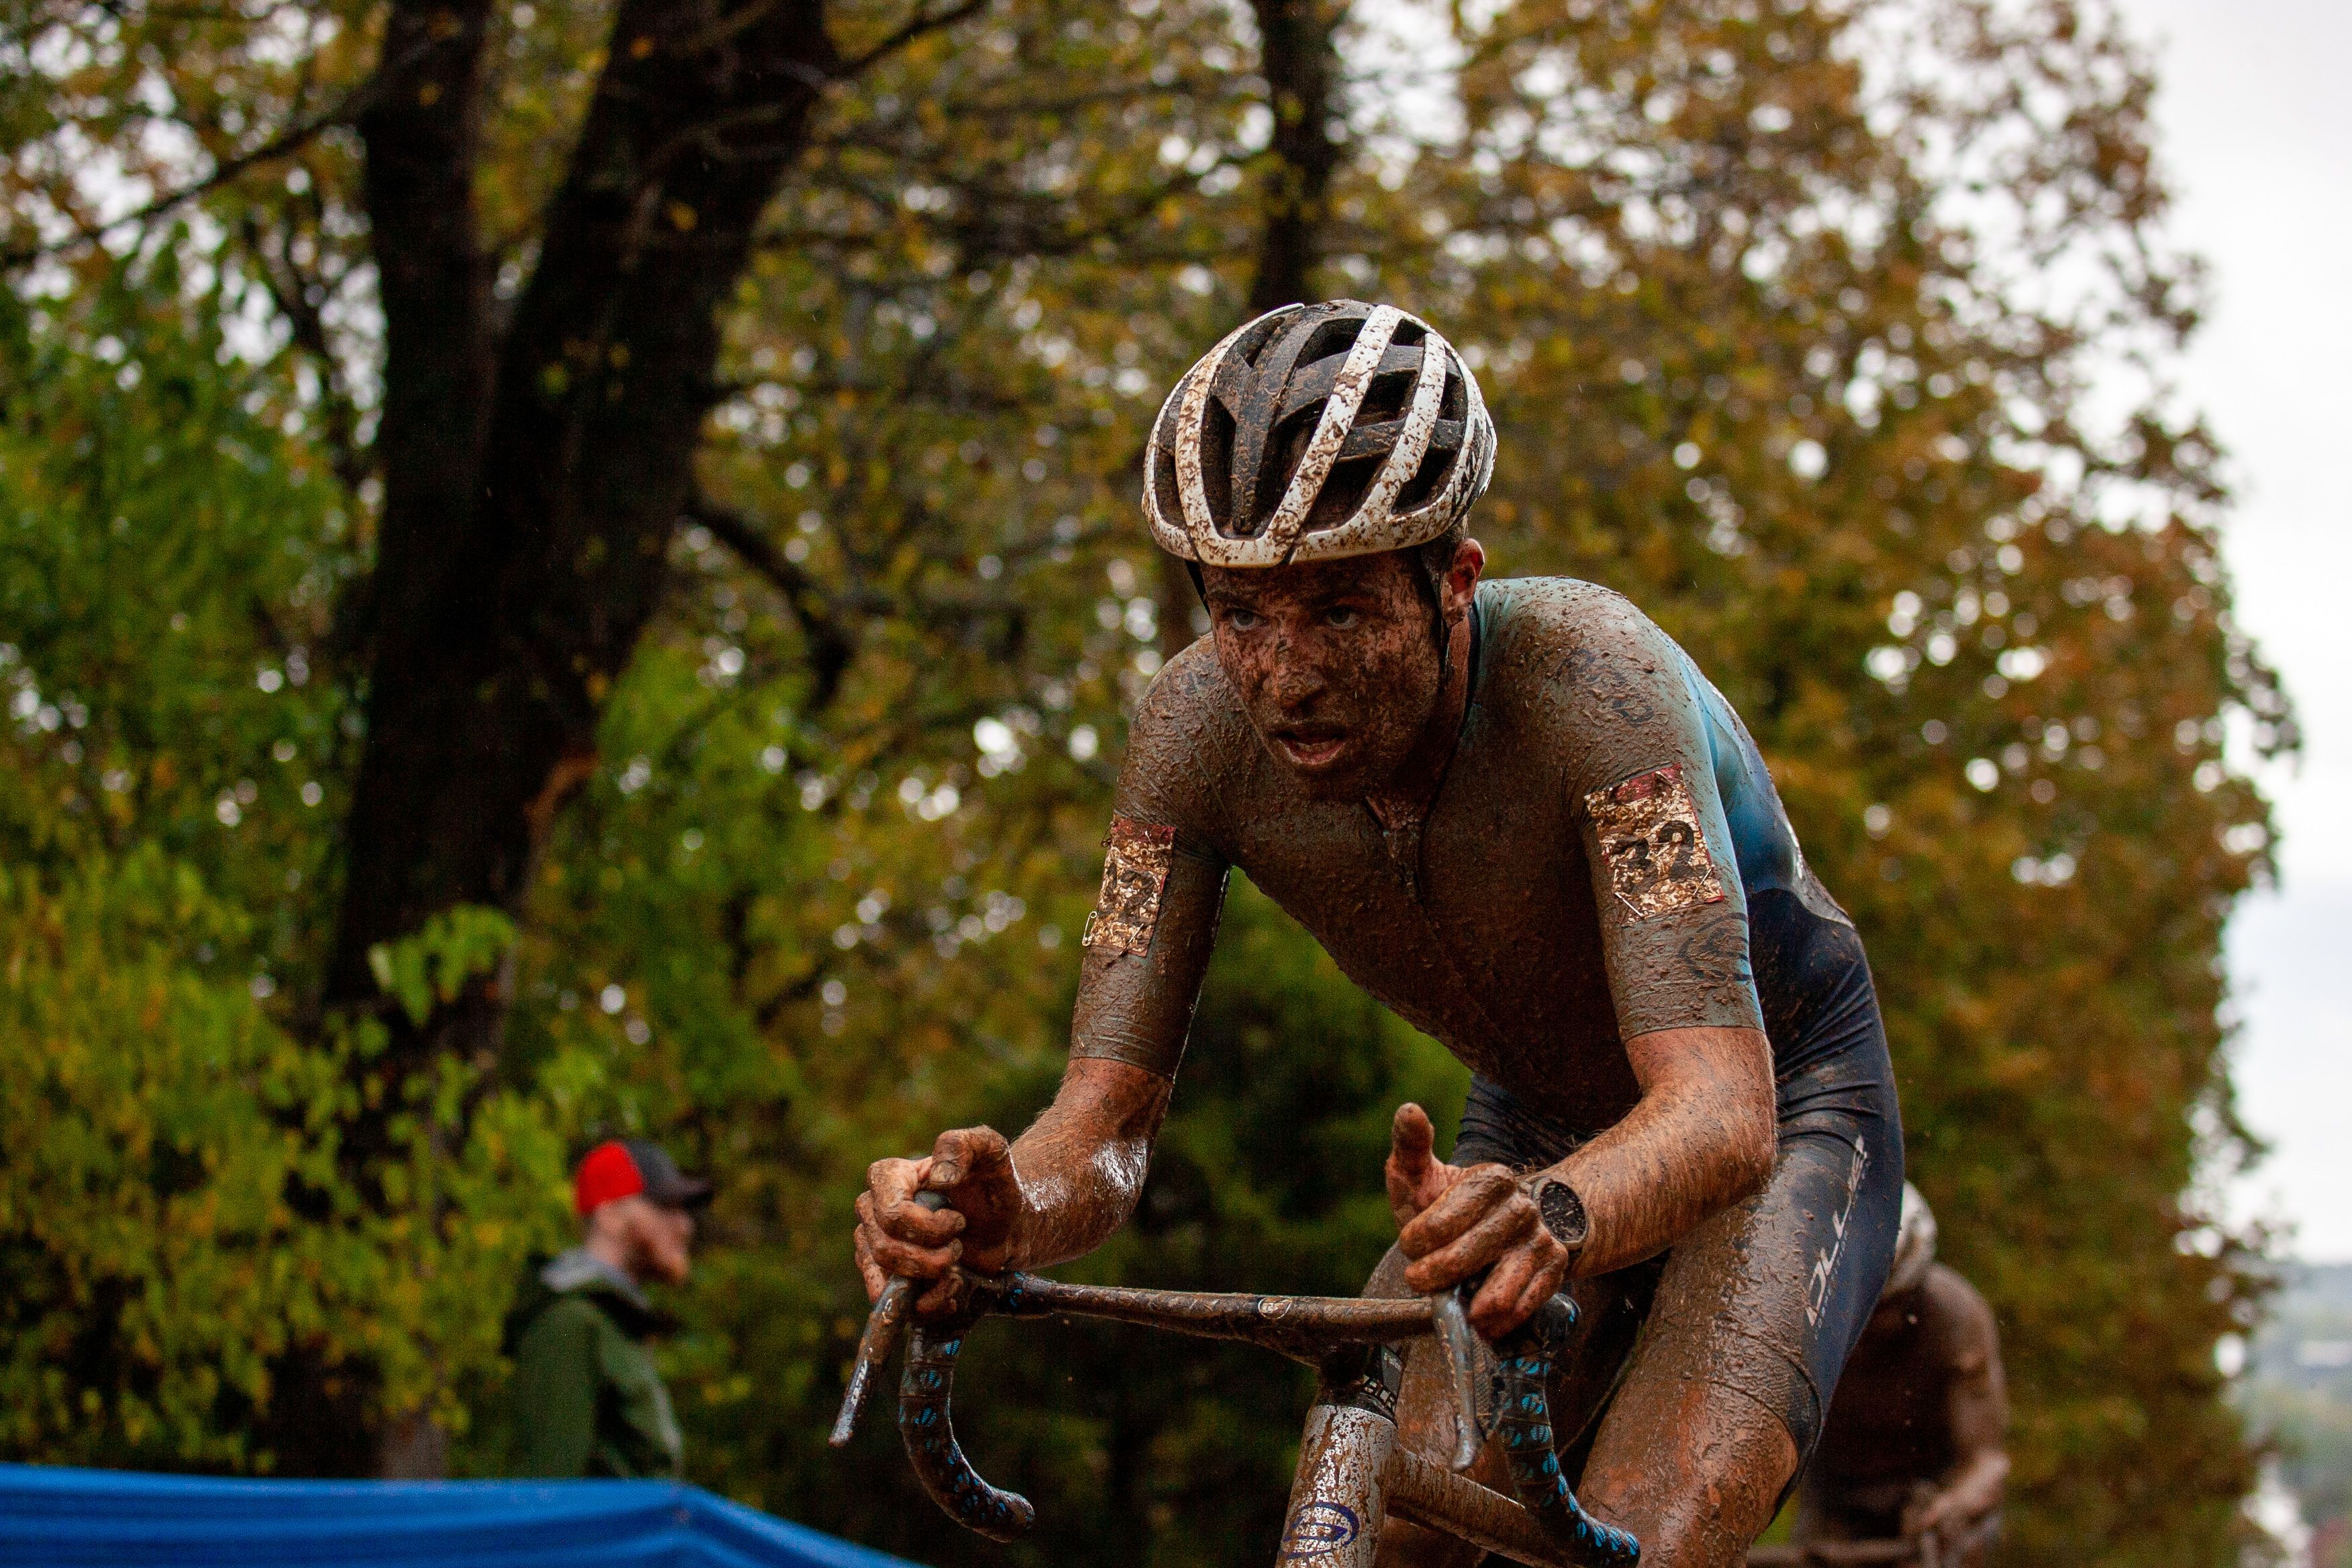 Getting muddy while racing Cyclocross